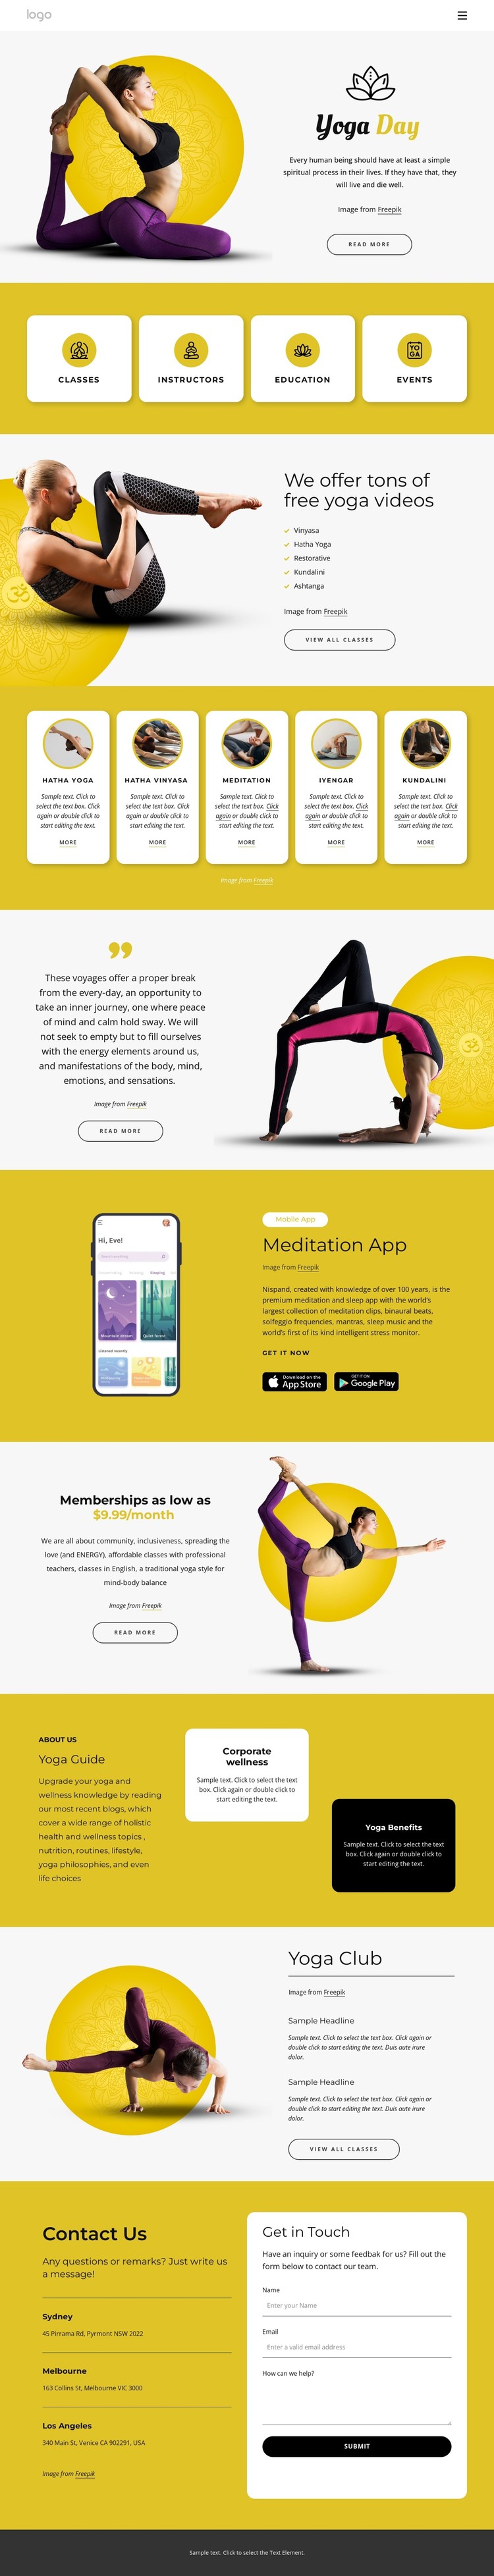 Yoga events and classes CSS Template